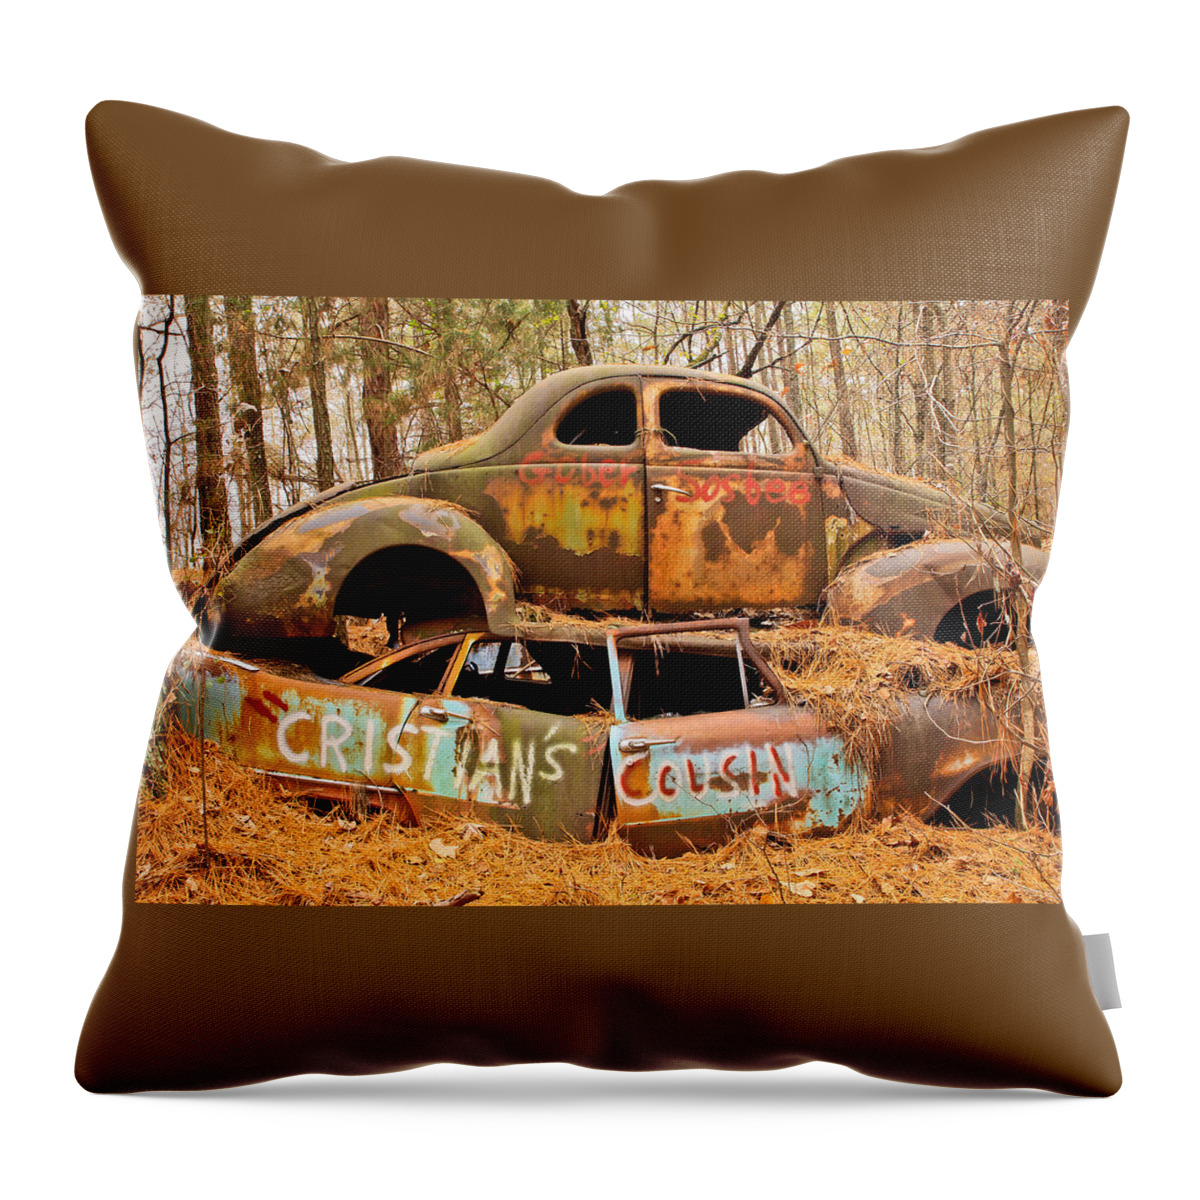 Junk Yard Throw Pillow featuring the photograph Cristian's Cousin by Tom and Pat Cory